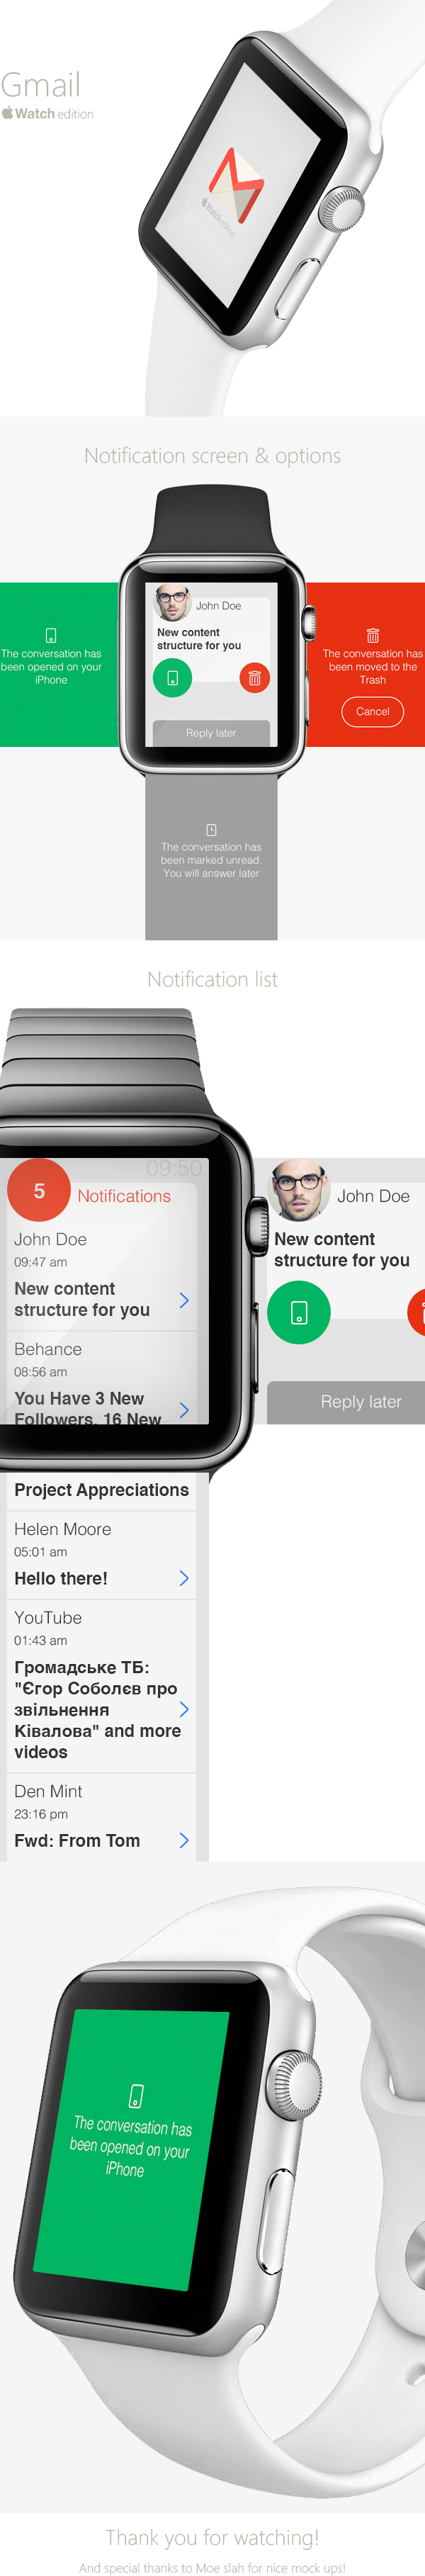 03-apple-watch-app-ui-ux-user-experience-interfface-design.png